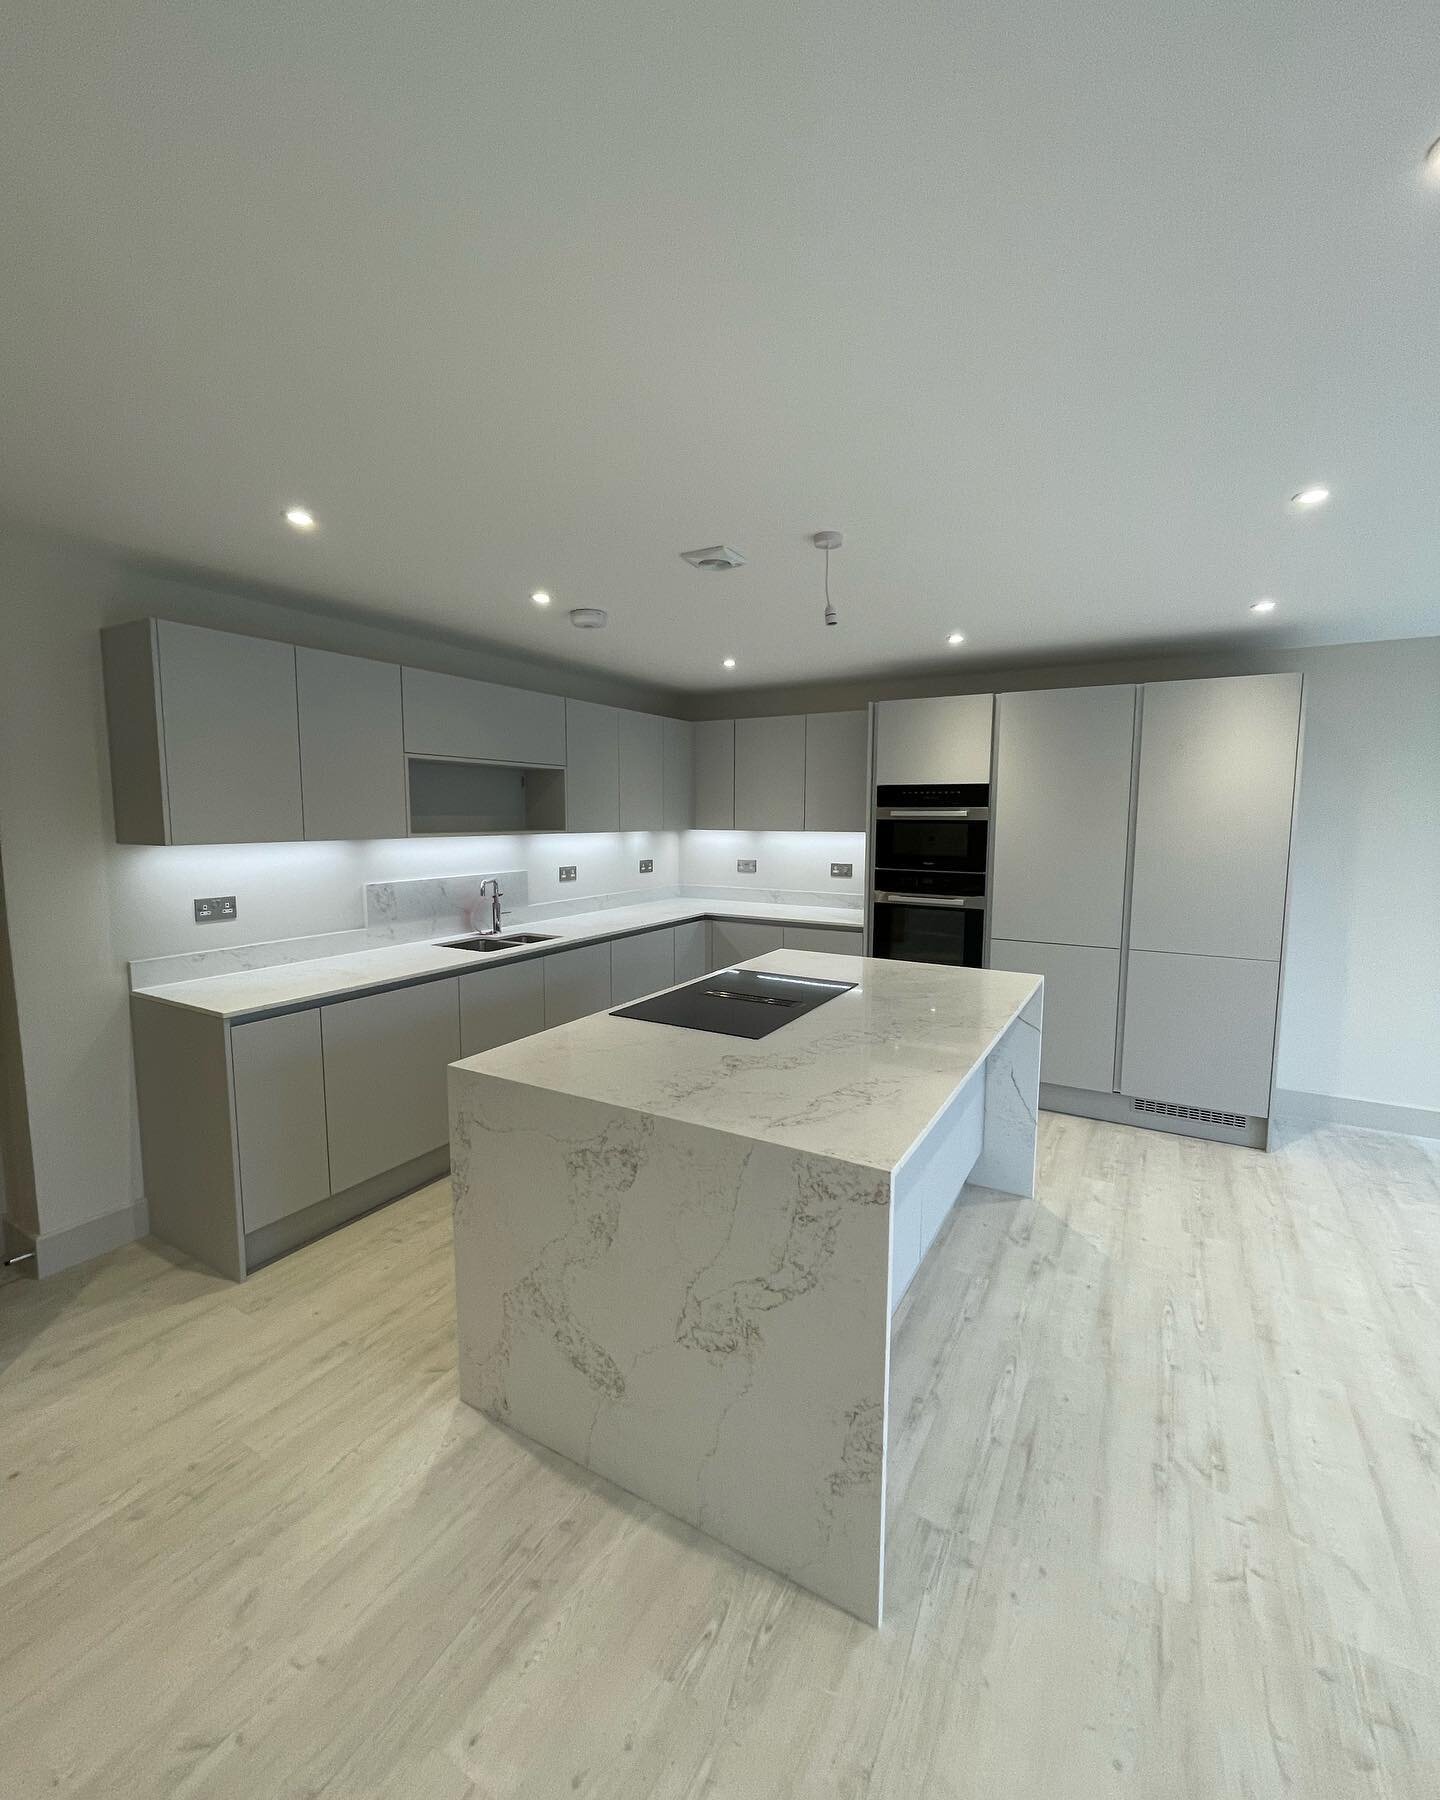 We love to see images of our kitchens once they are fitted 😍

We recently made 10 handleless kitchens for some beautiful apartments overlooking the sea near Christchurch and were delighted to be shown around and grab some pics 📸📸

Here are a few o